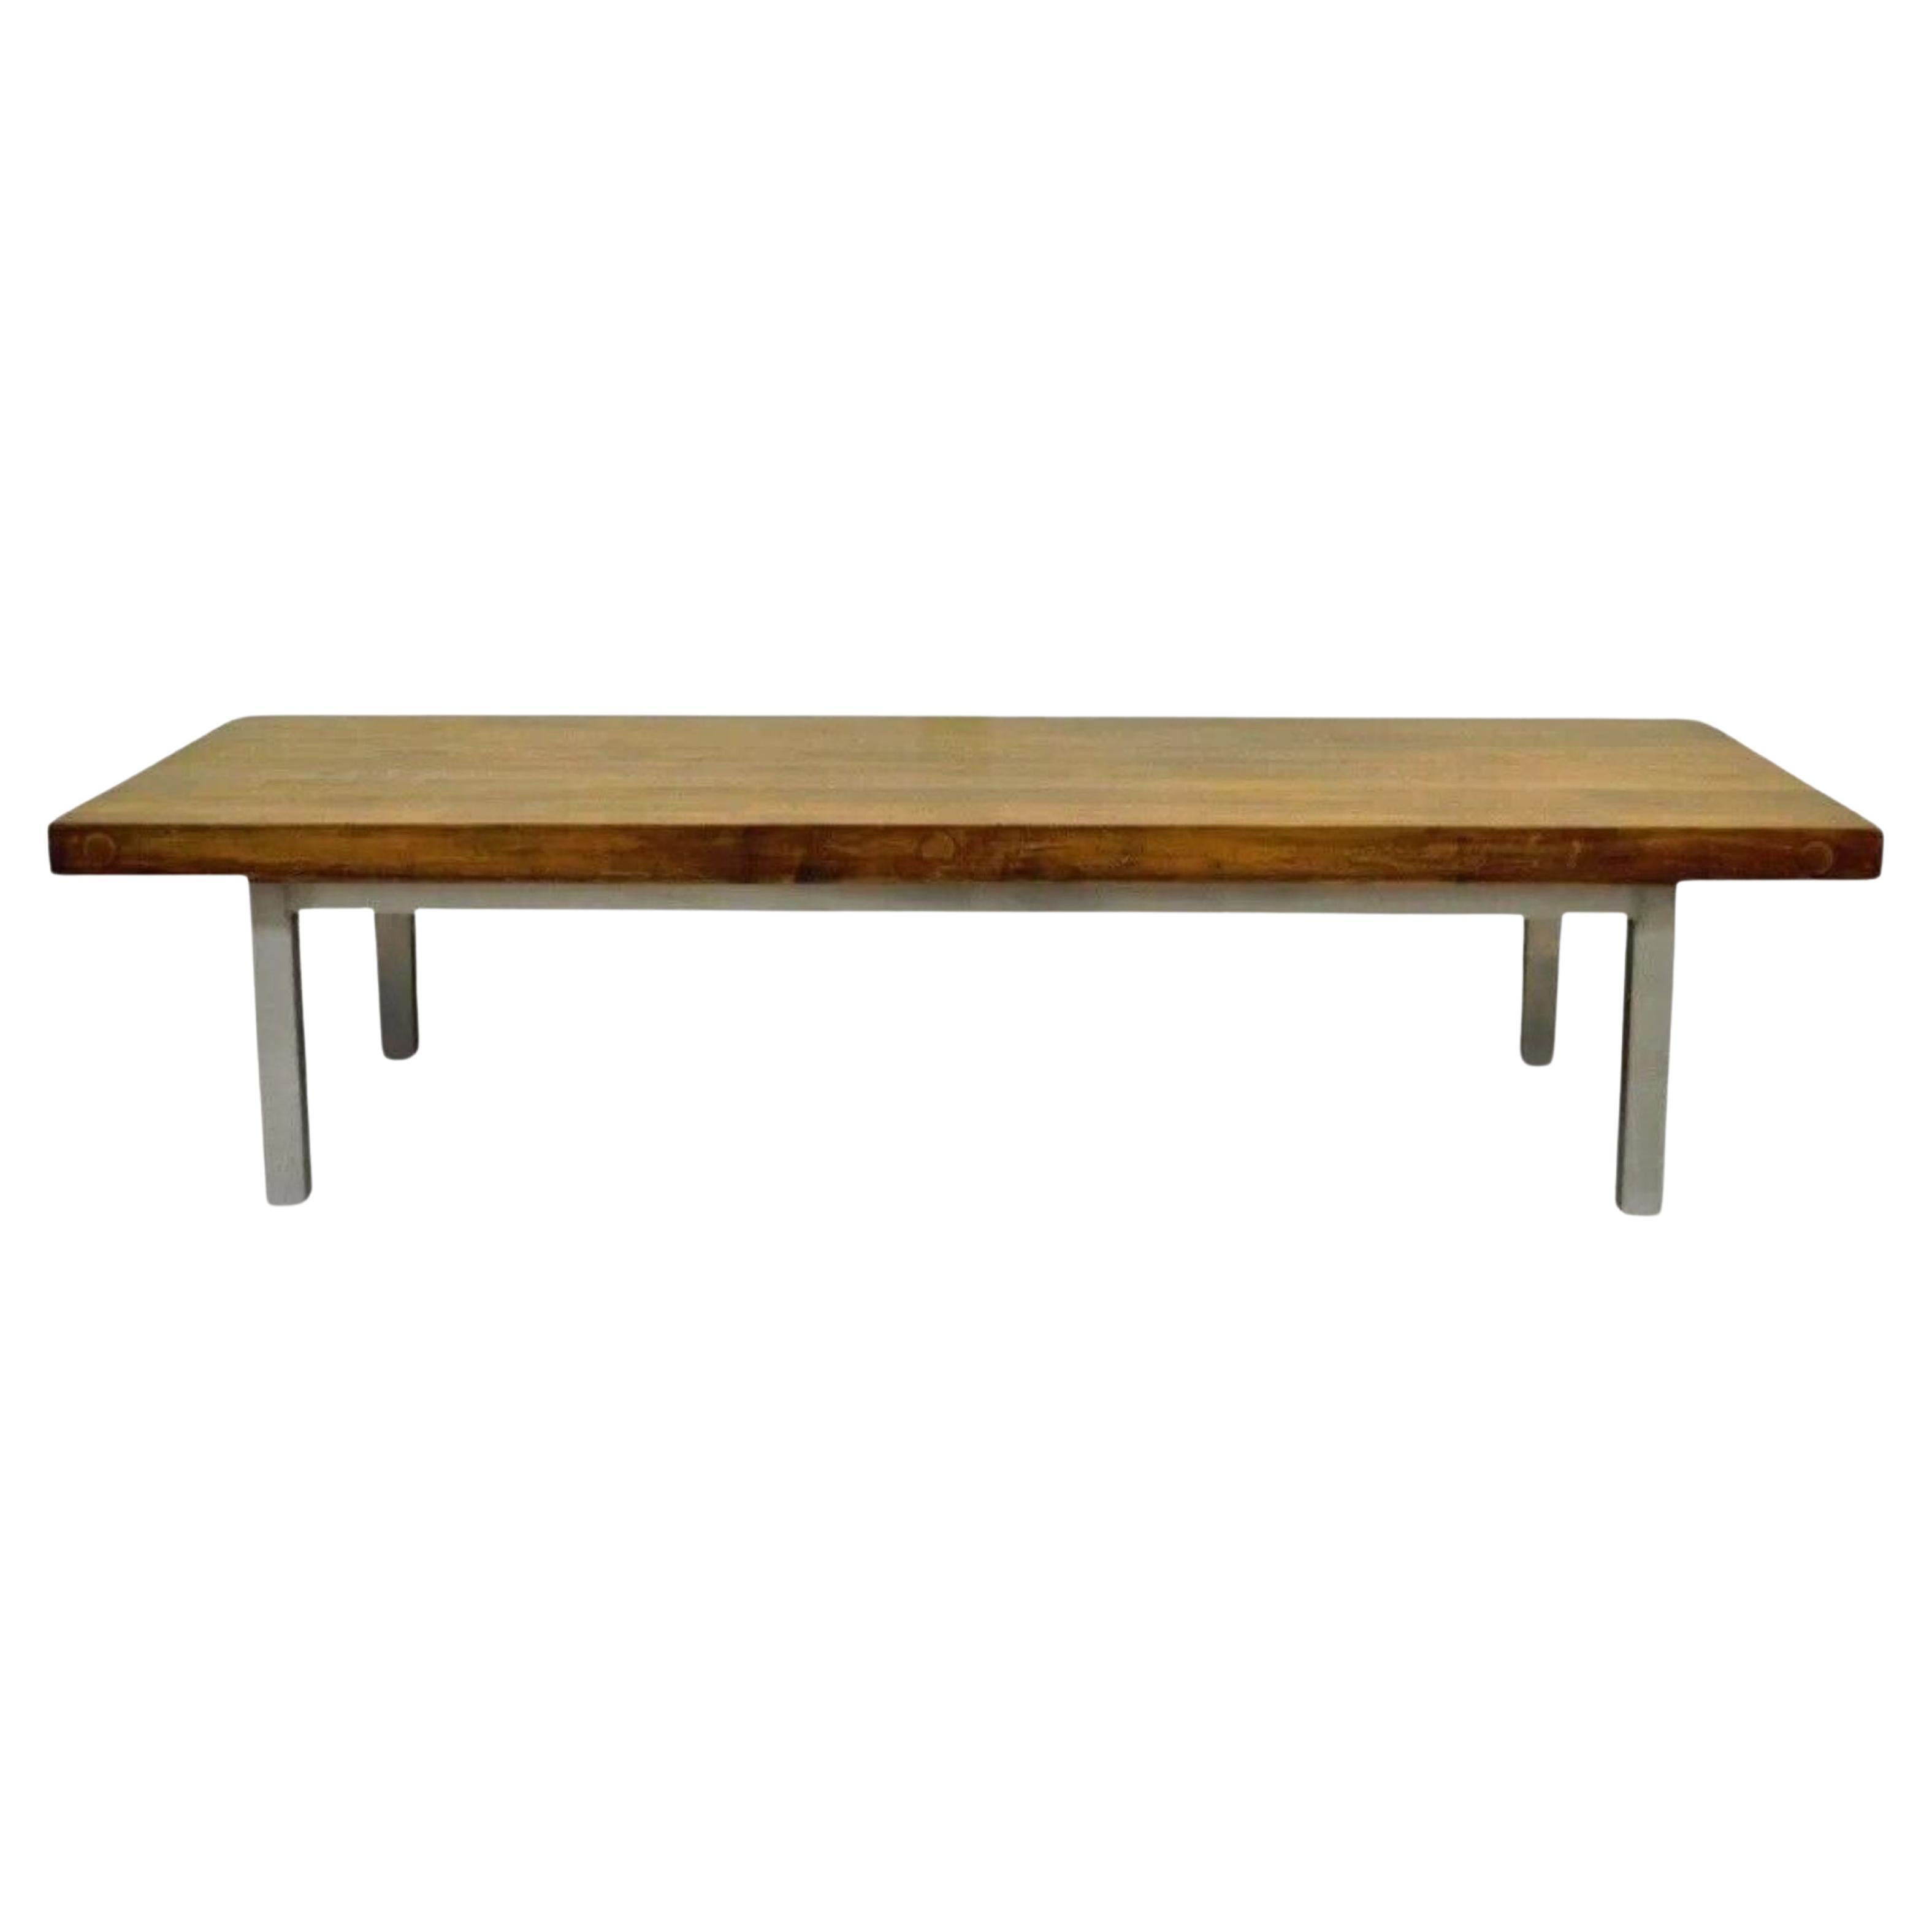 Vintage Industrial Modern Reclaimed Butcher Block Aluminum Base Coffee Table For Sale